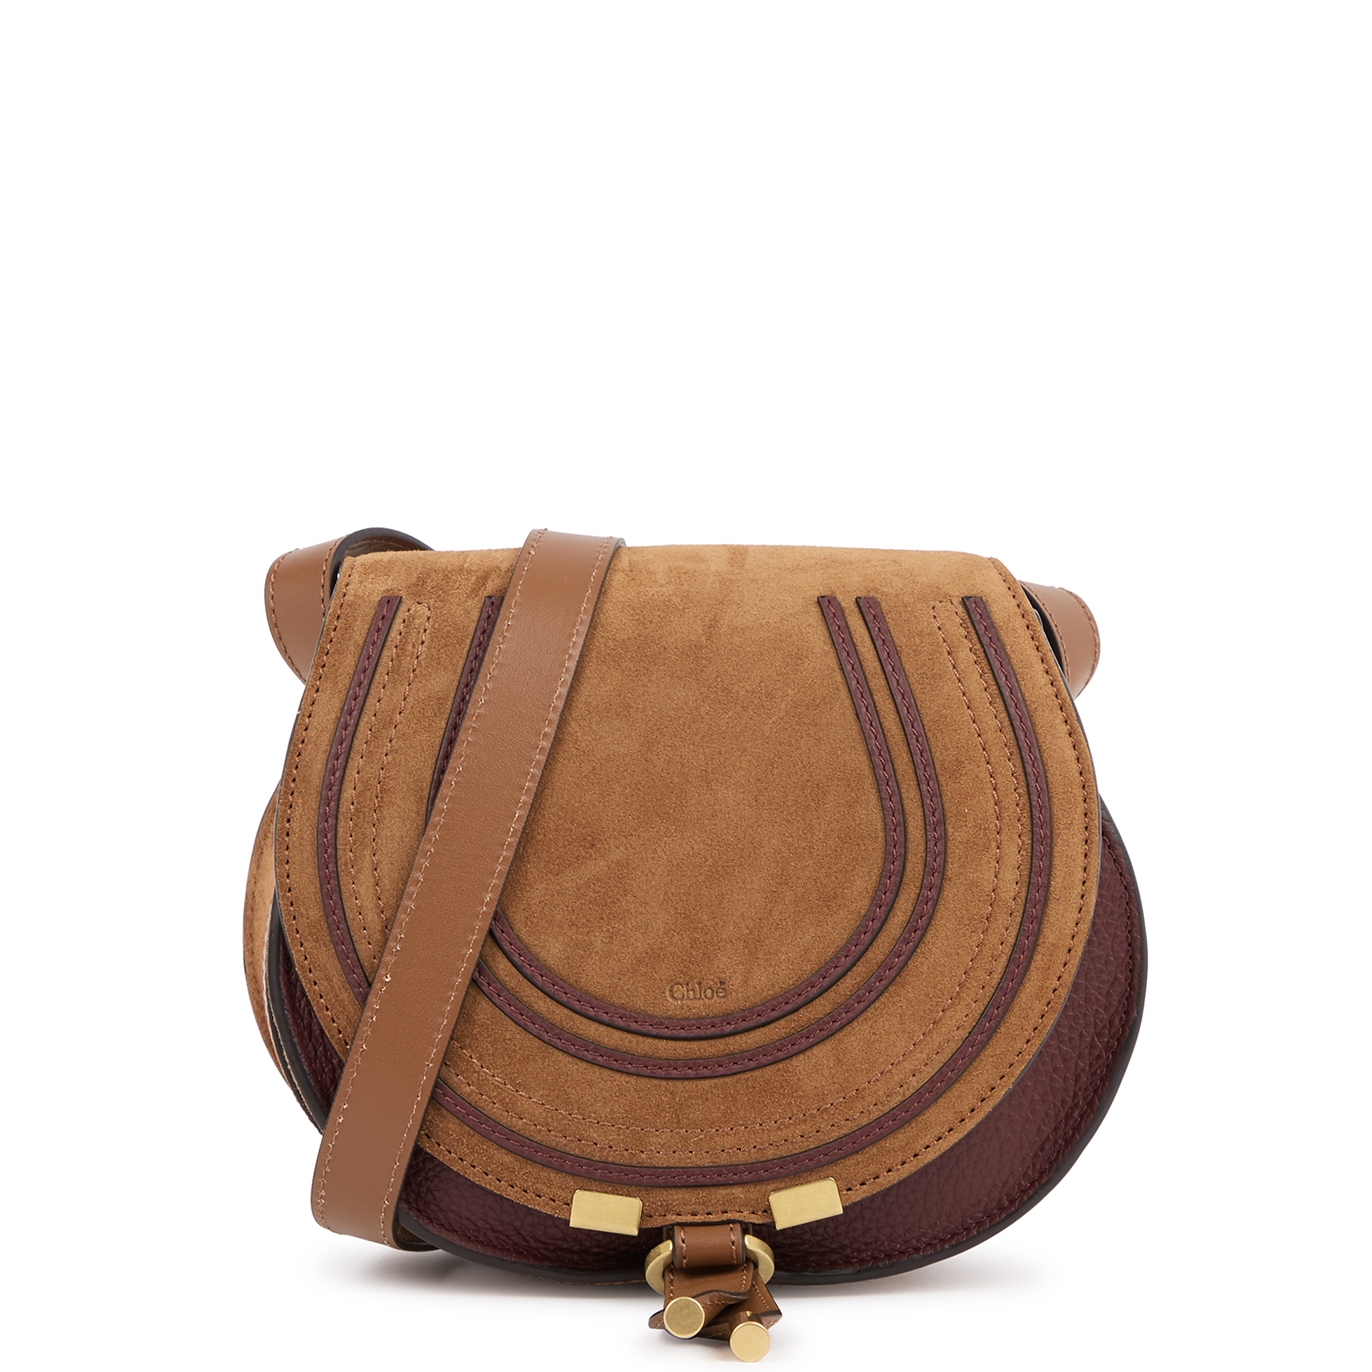 Chloé Marcie Small Brown Suede Saddle Bag - TAN